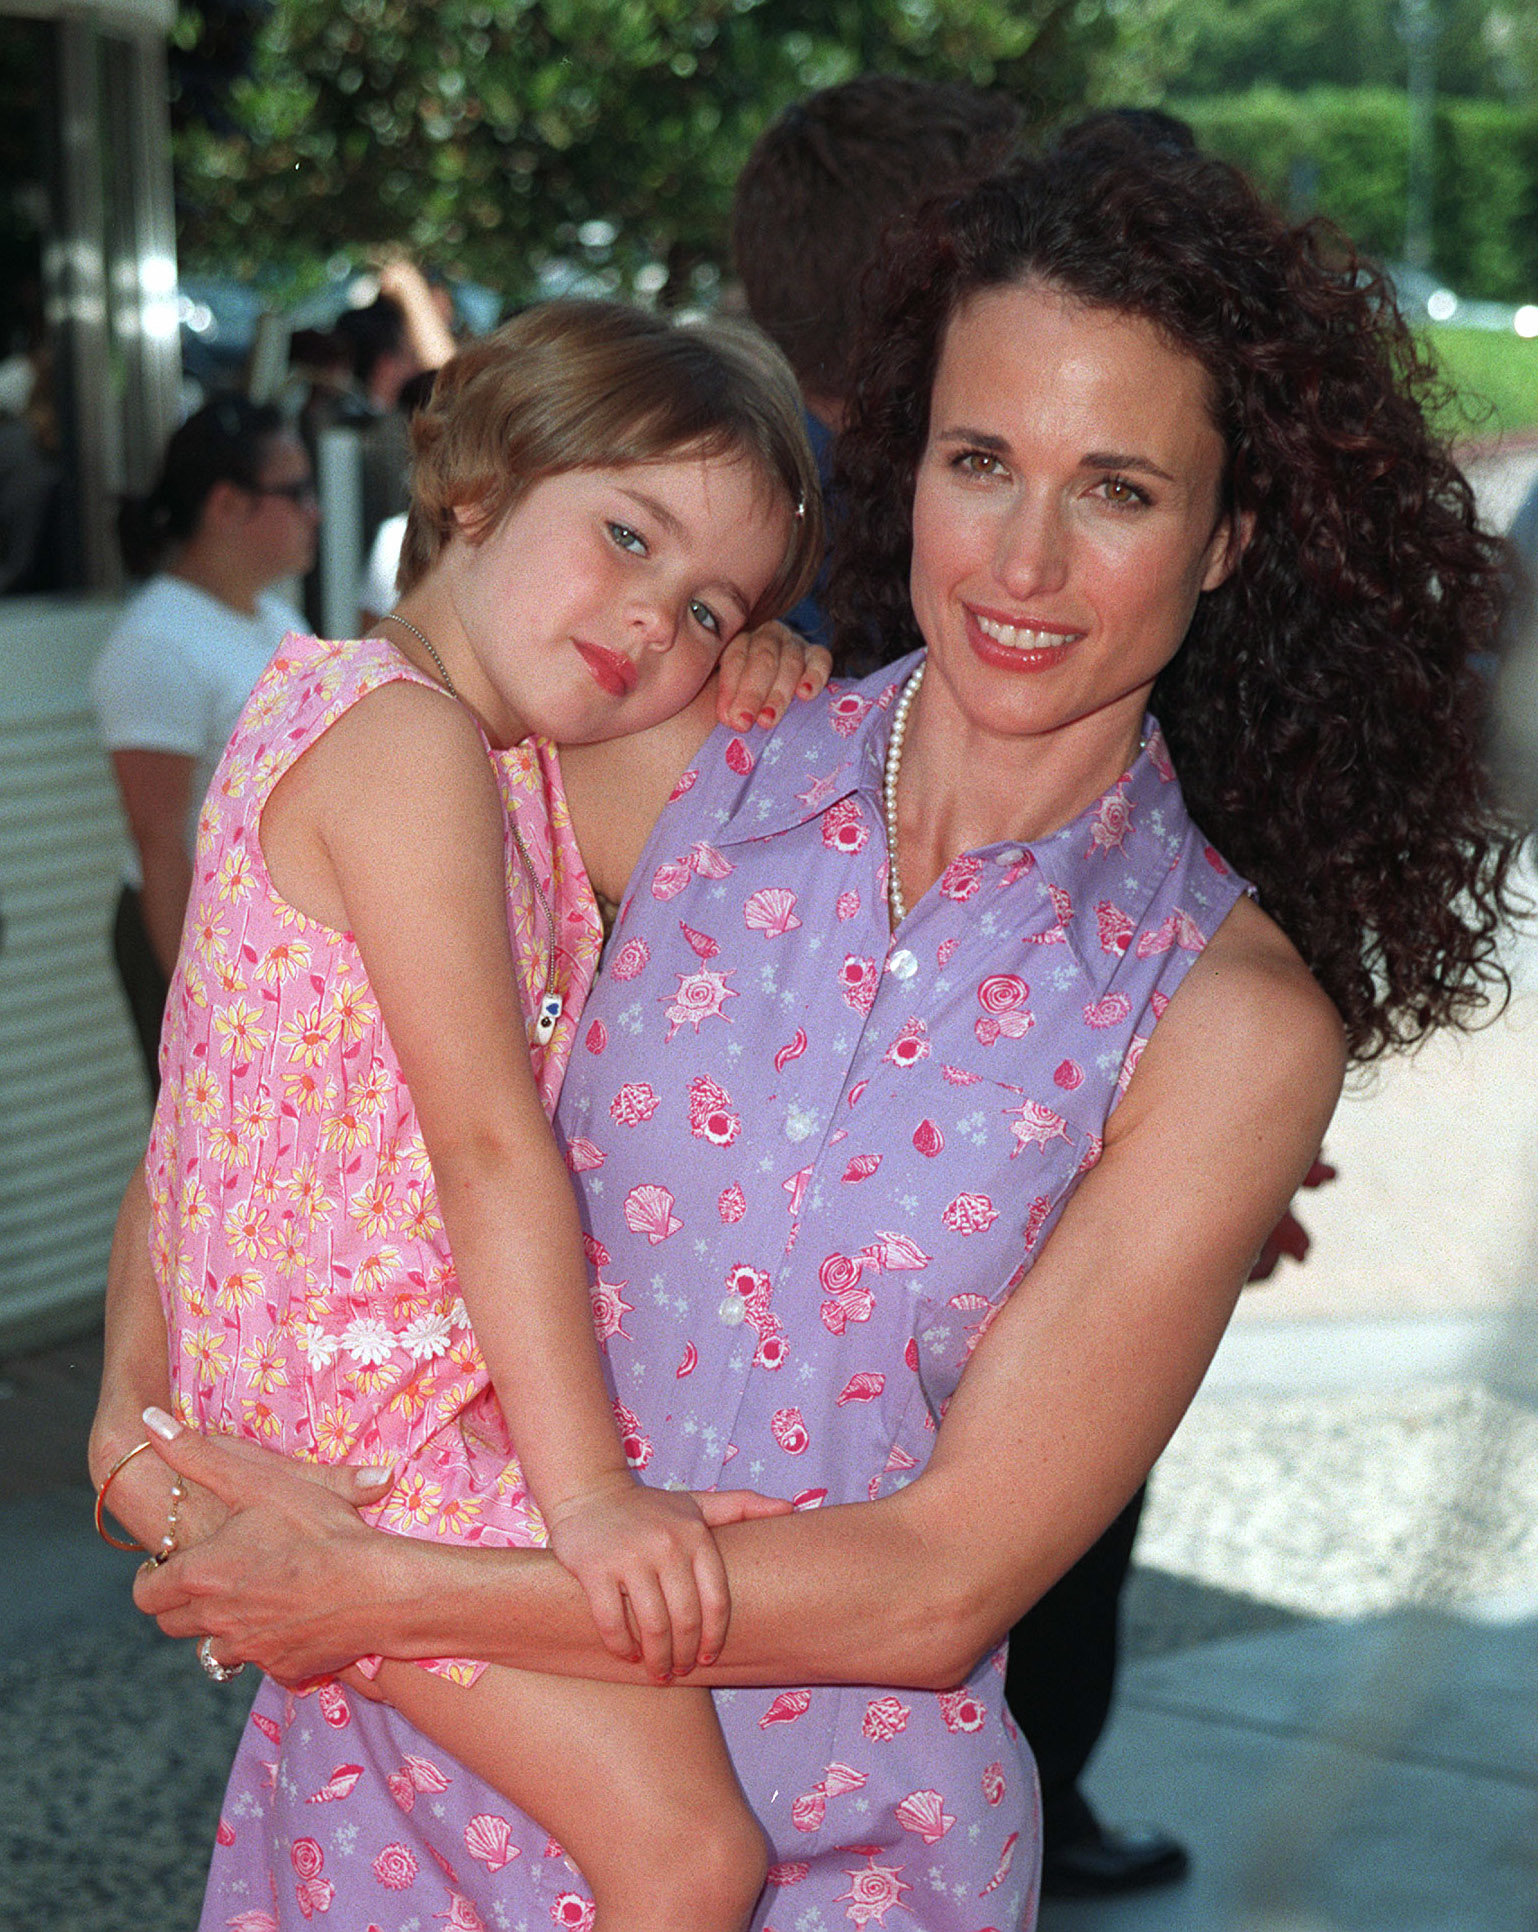 Andie McDowell and her daughter Margaret Qualley on July 11, 1999 | Source: Getty Images